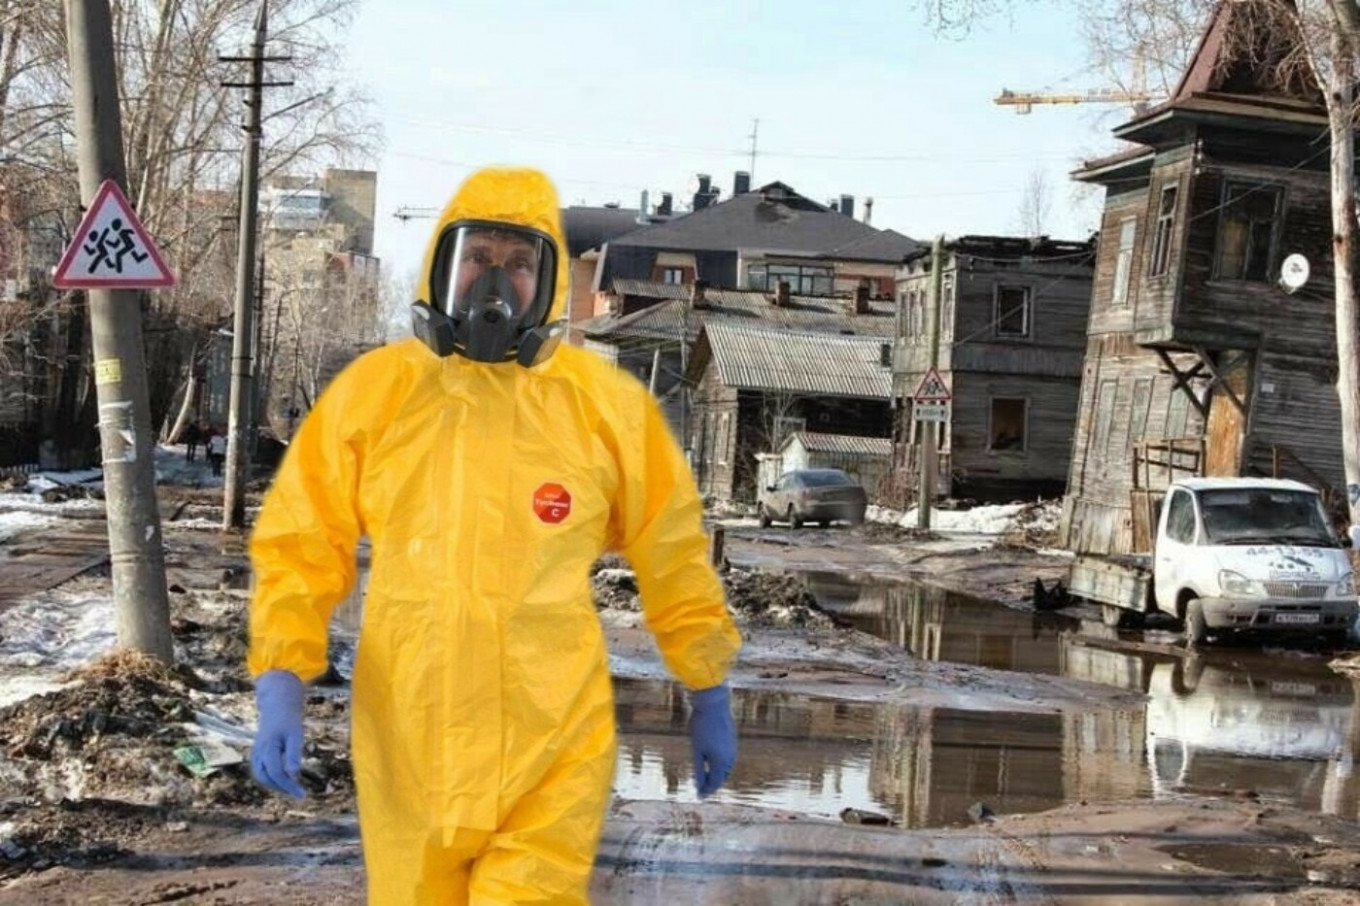 Putin S Yellow Coronavirus Suit The Suit That Launched 1 000